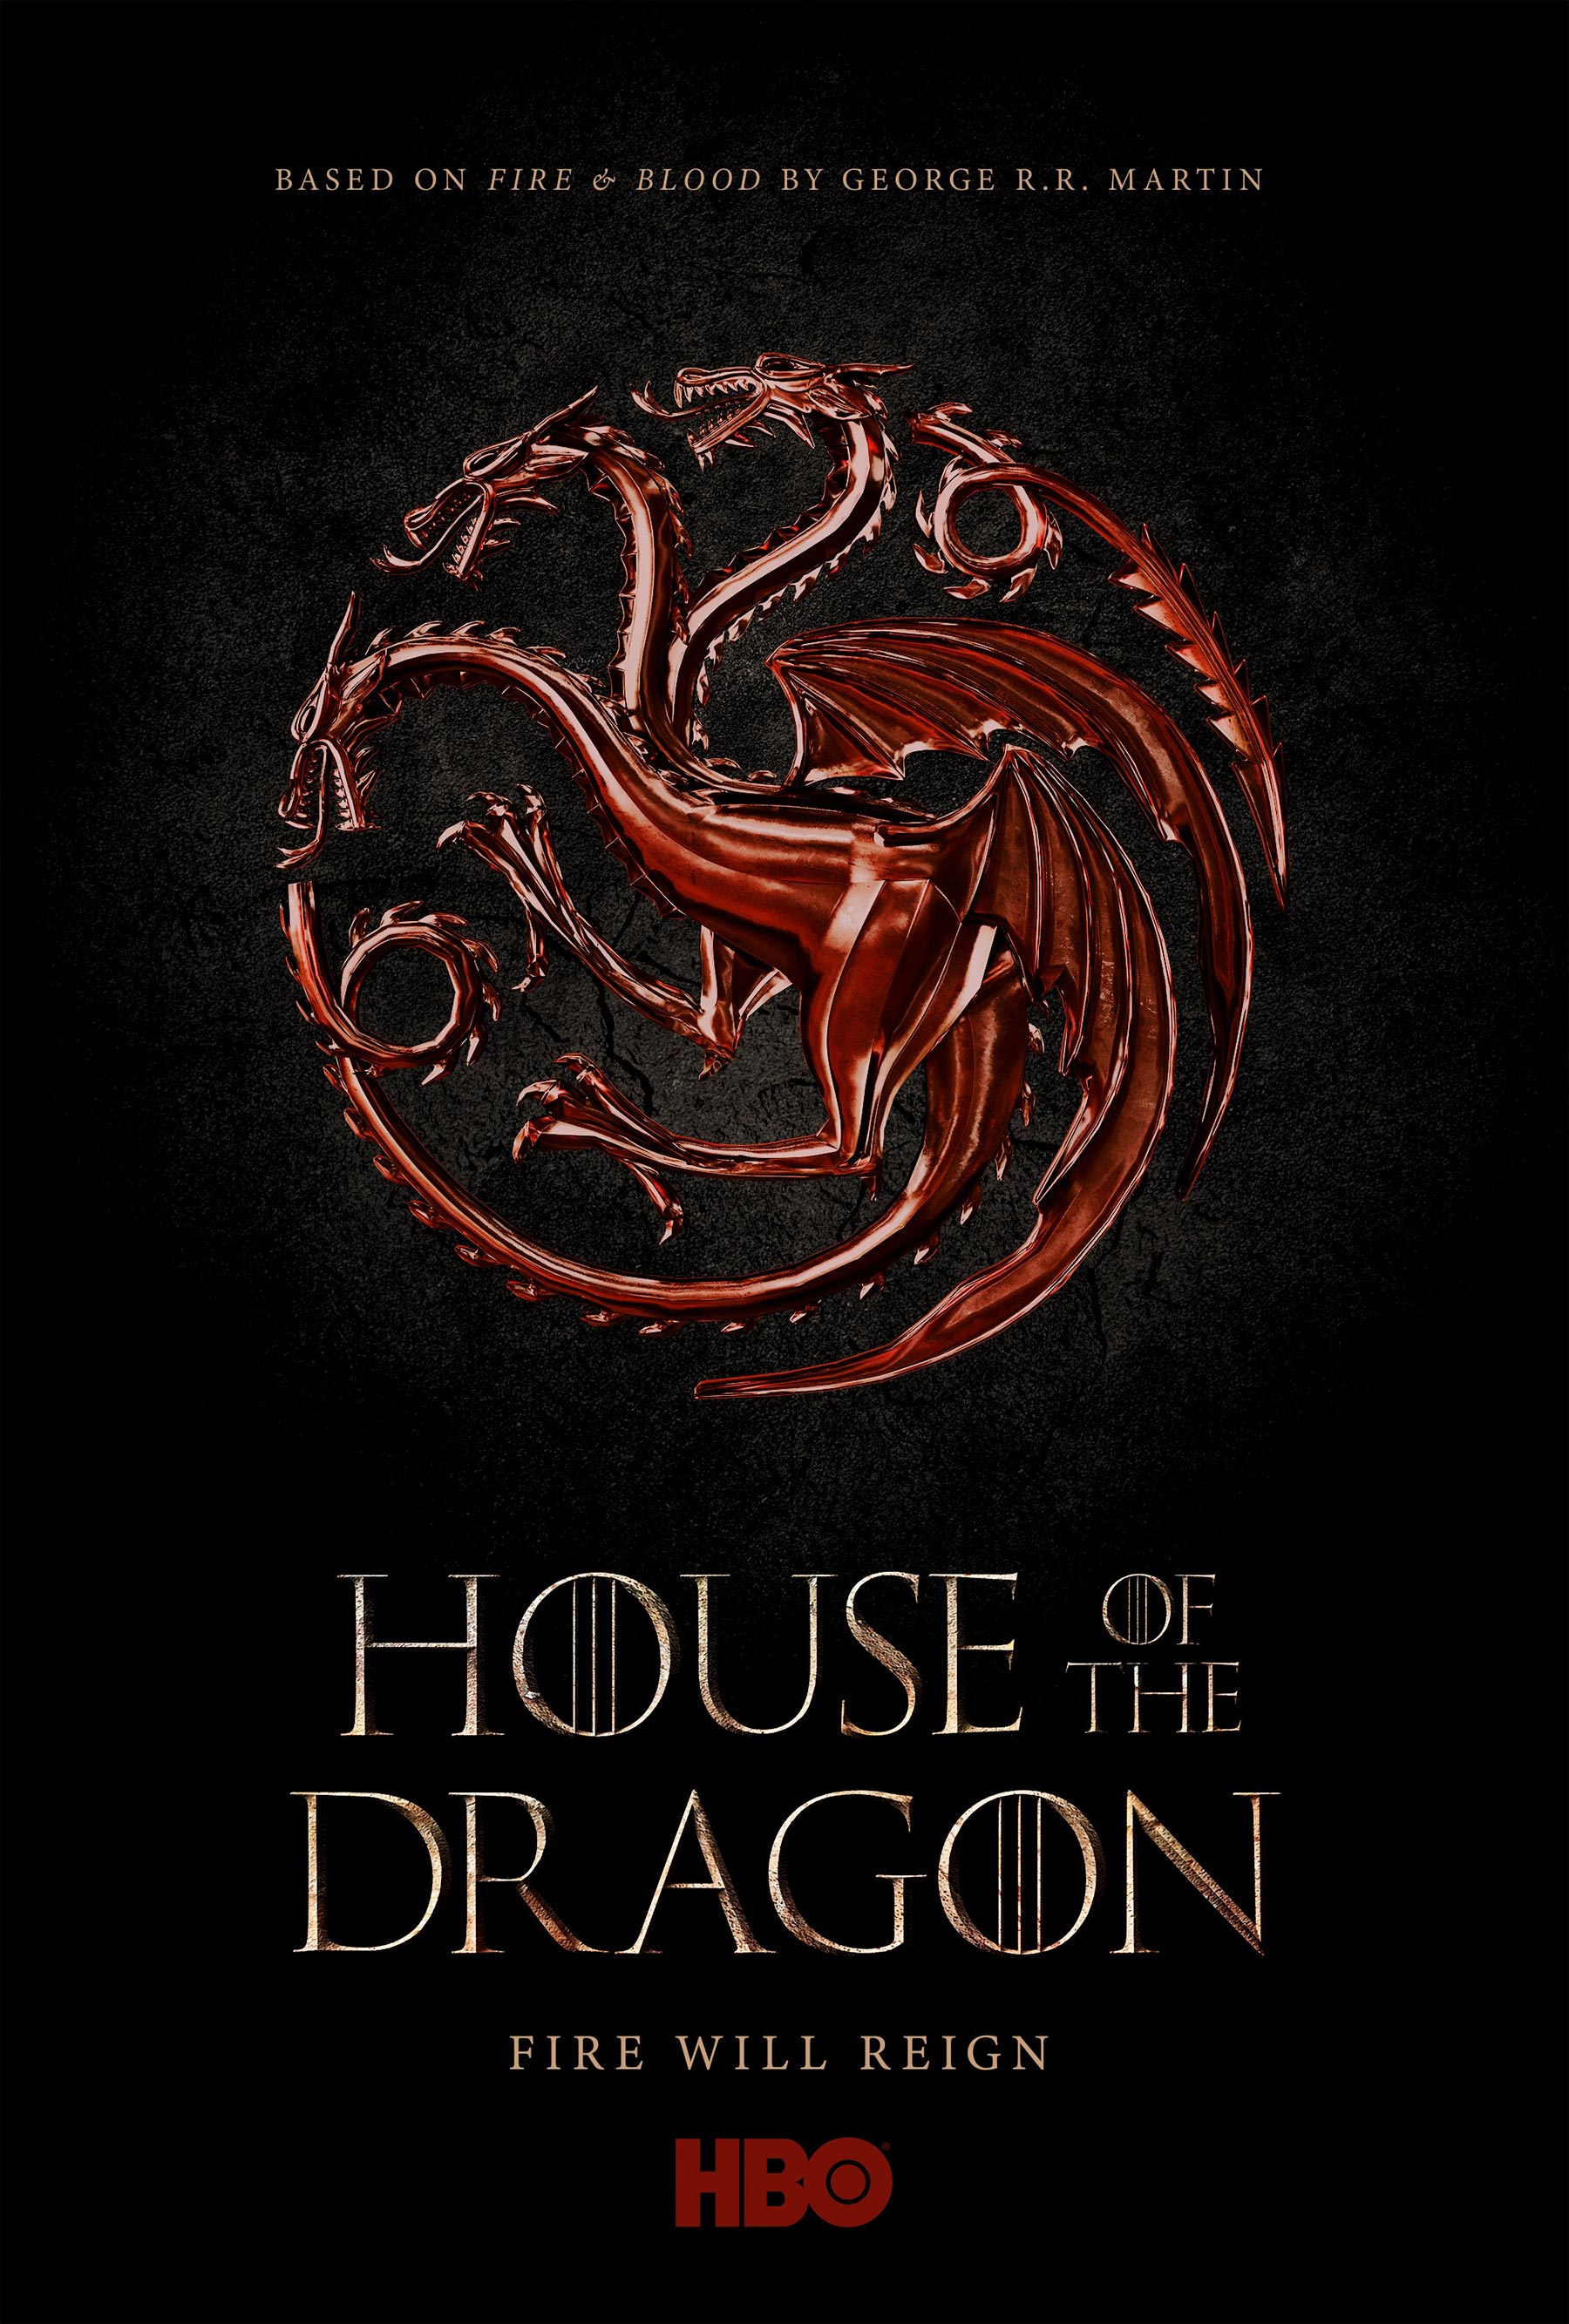 Game of Thrones’ Prequel ‘House of the Dragon’ Gets Straight-to-Series Order at HBO